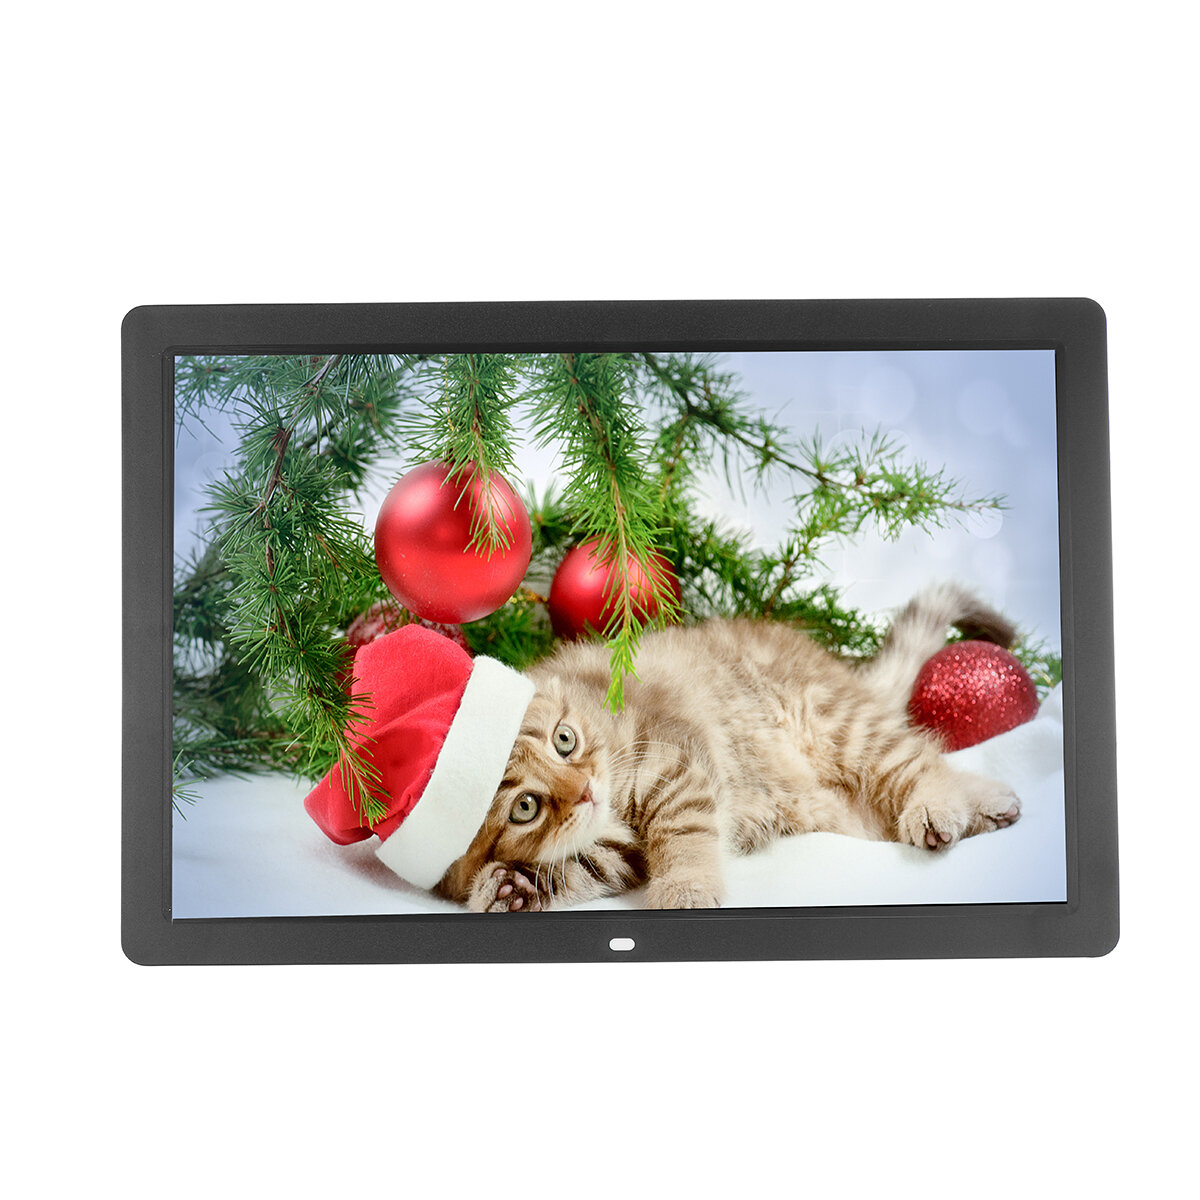 Image of 17 Inch 1440x900P 16:9 HD Touch Screen Digital Photo Frame Audio Video Player Support MP3 WMA MPEG4 Format with Remote C